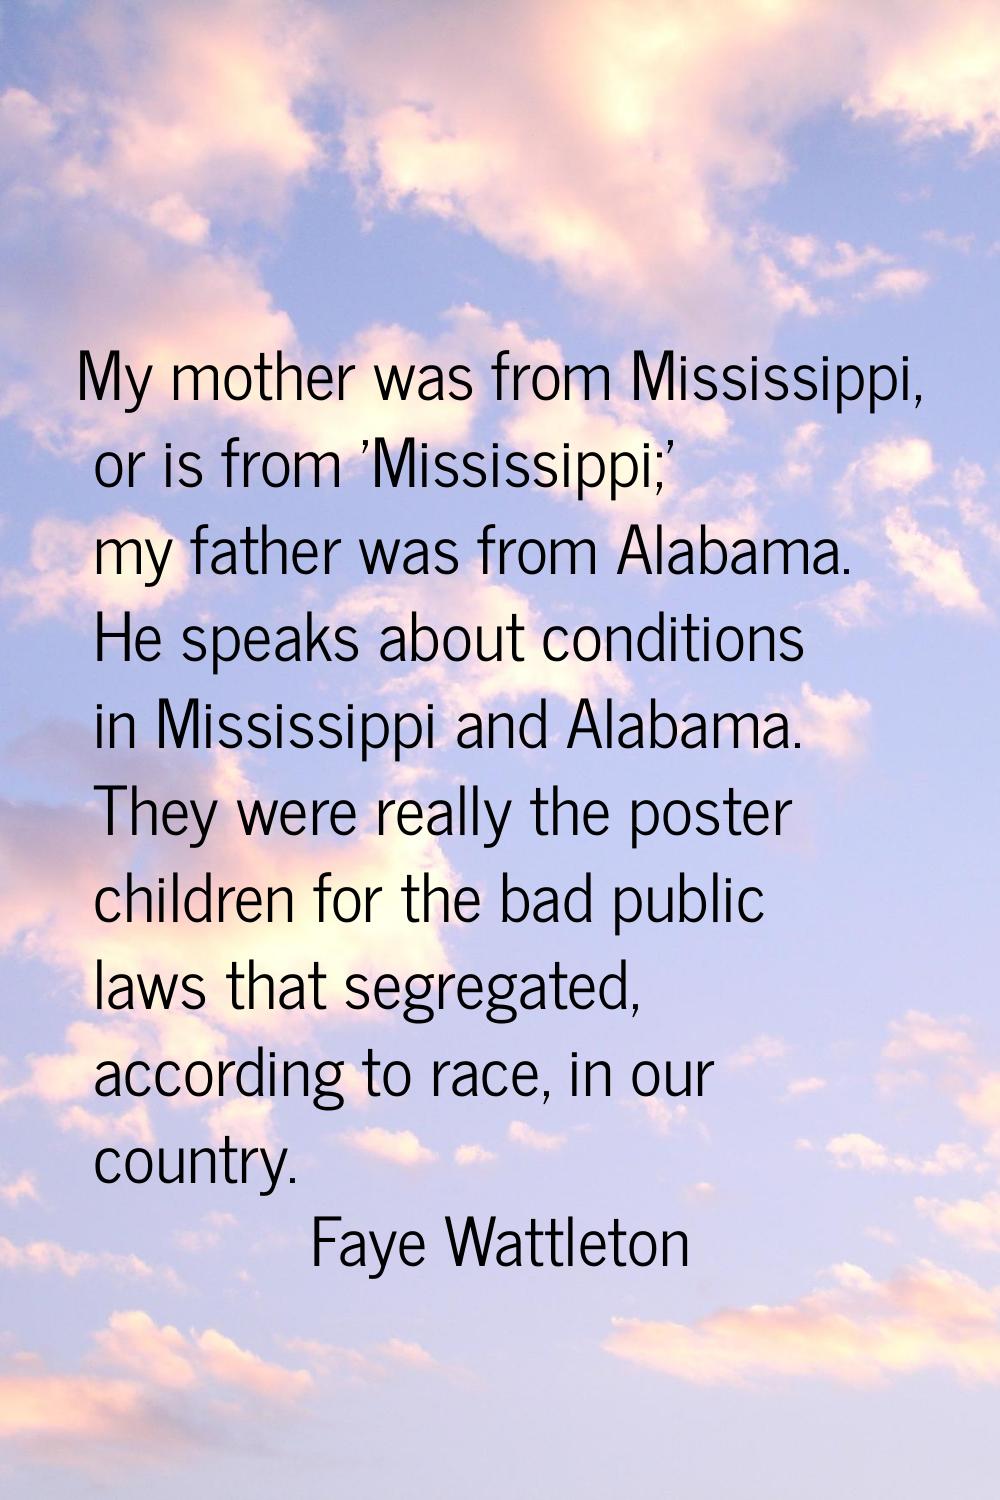 My mother was from Mississippi, or is from 'Mississippi;' my father was from Alabama. He speaks abo